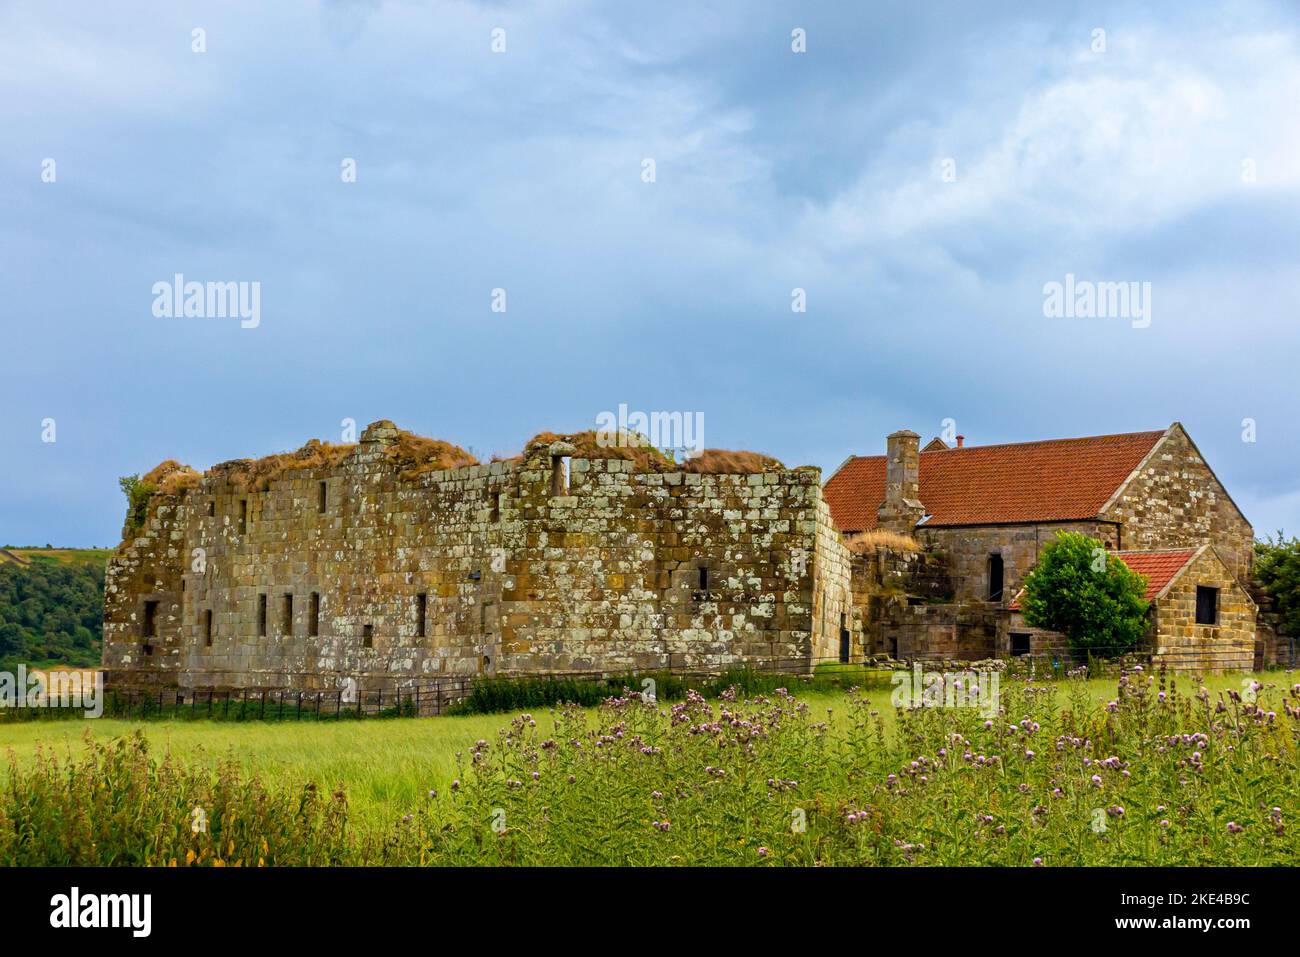 Danby Castle a fourteenth century castle overlooking the Esk Valley in the North York Moors National Park in northern England UK. Stock Photo